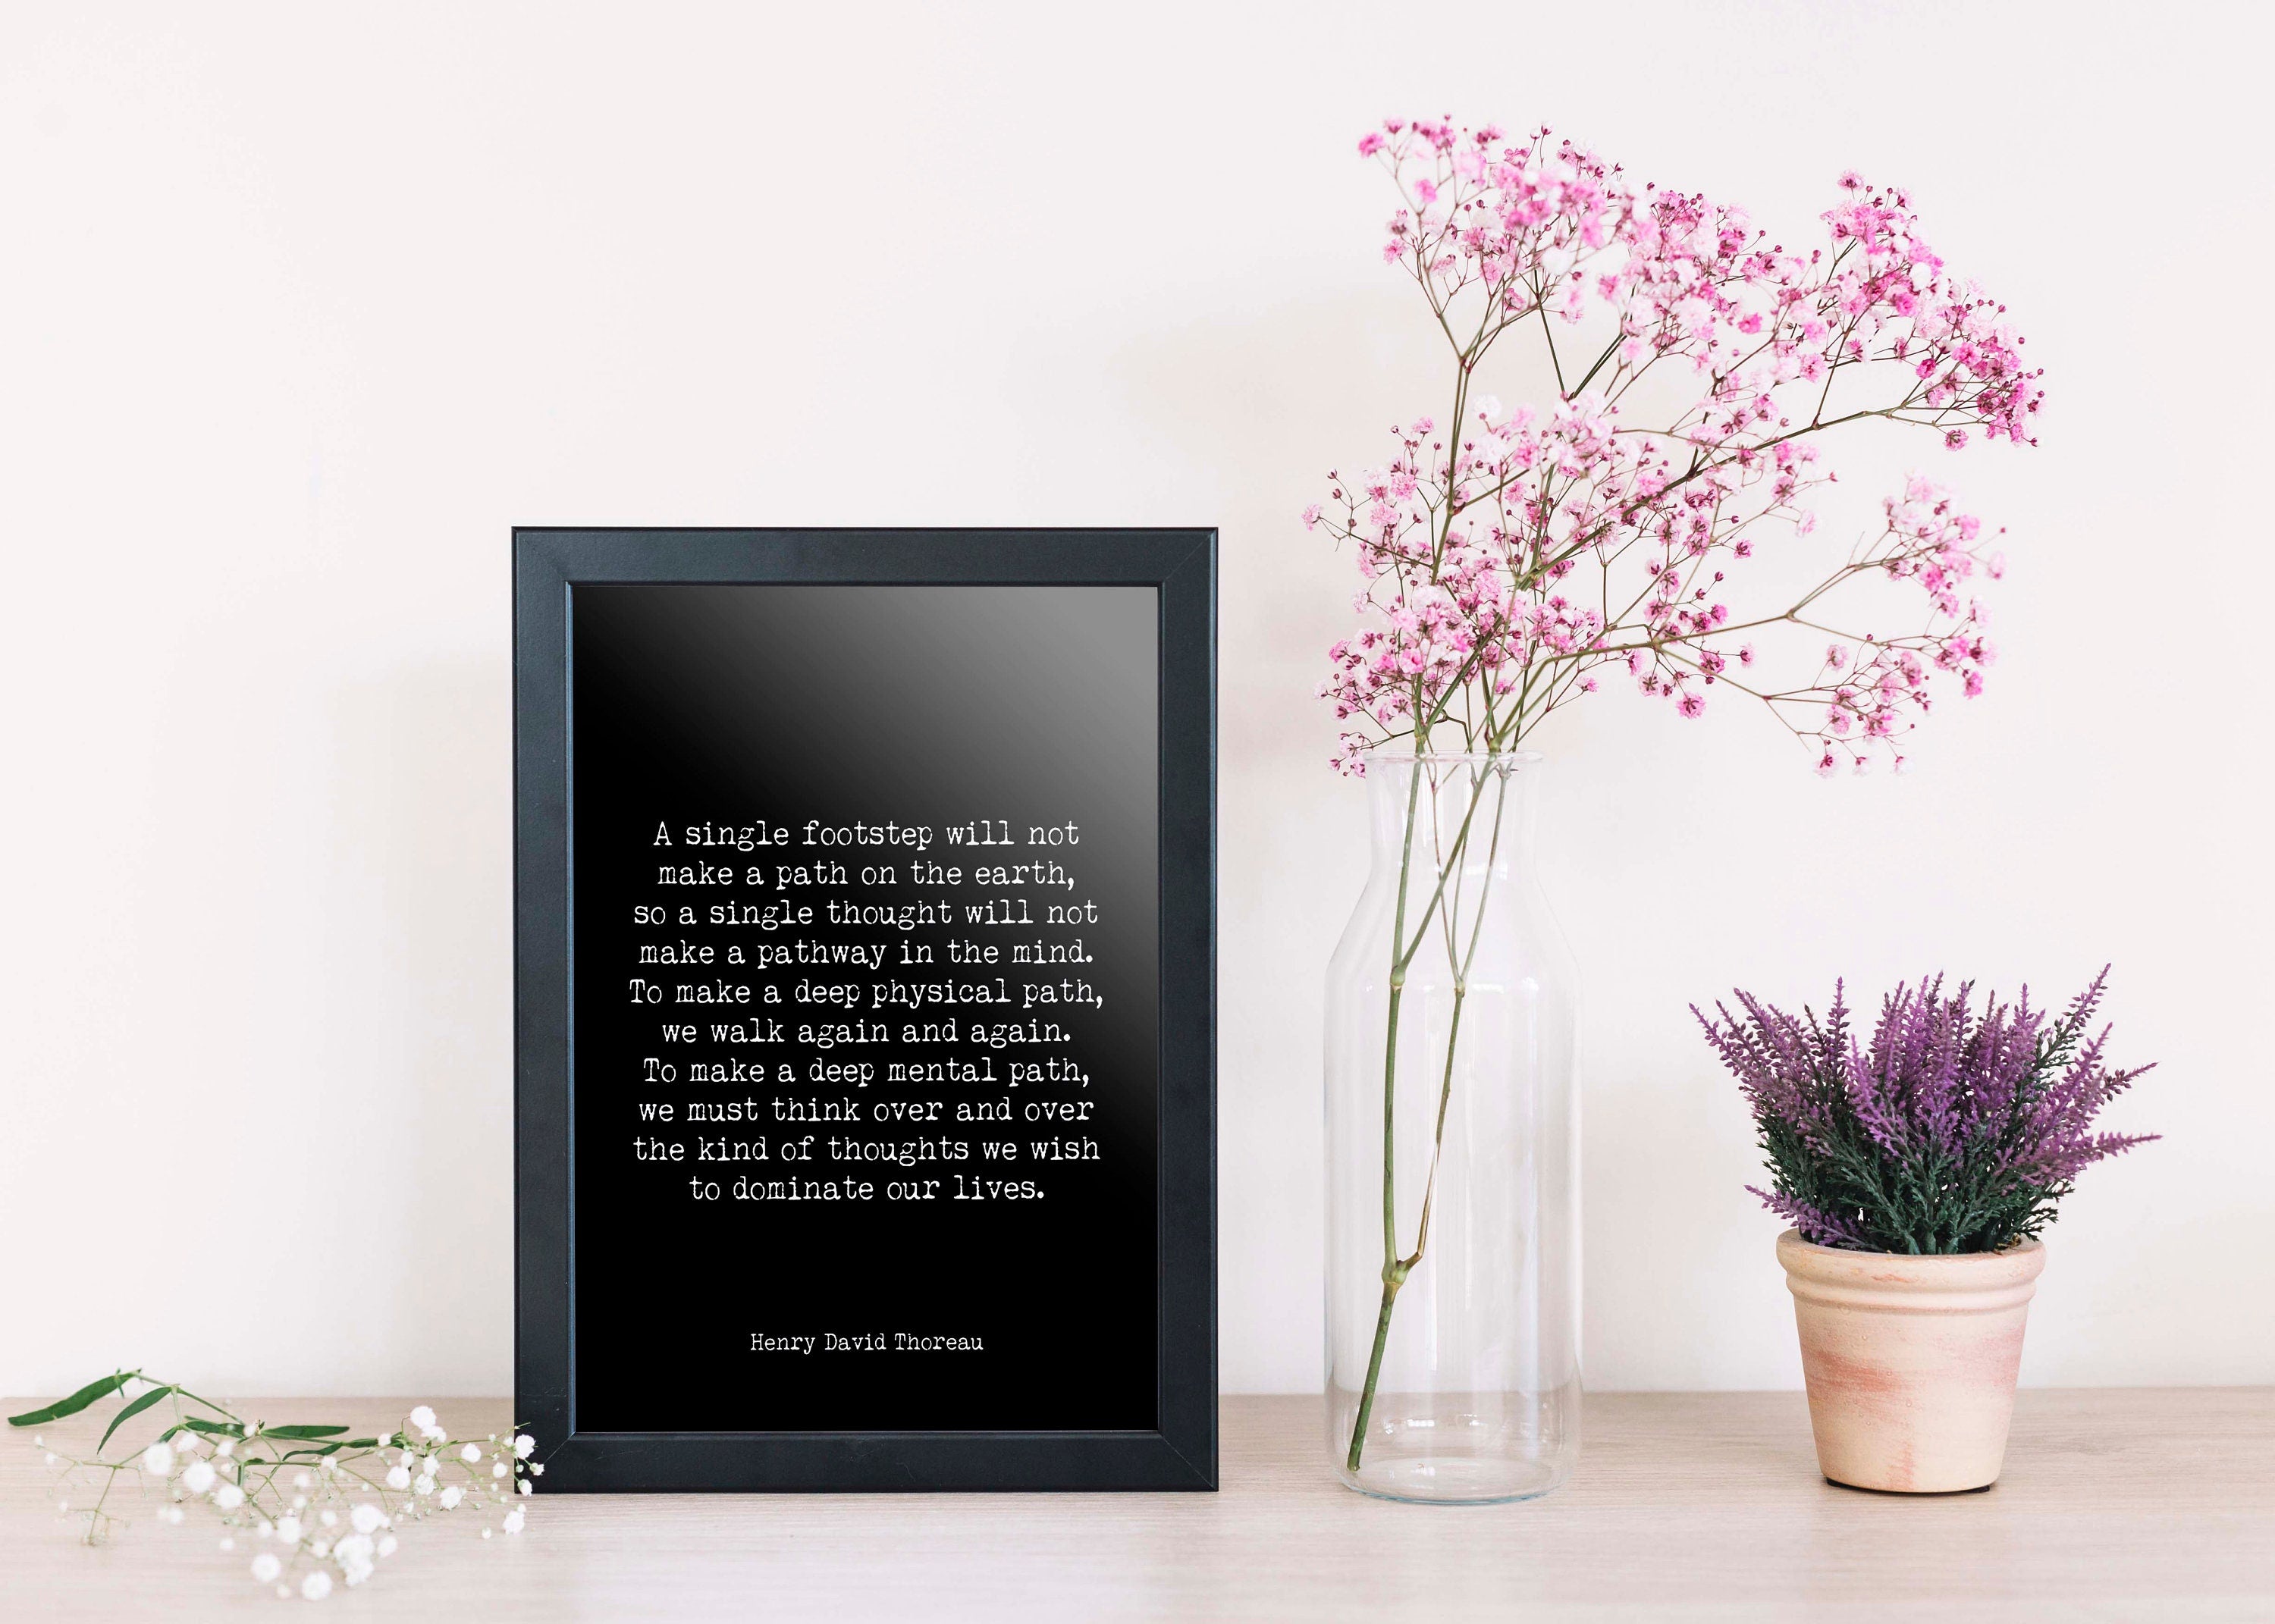 Thoreau Quote Inspirational Print, Single Footstep Henry David Thoreau Unframed and Framed Life Quote Print